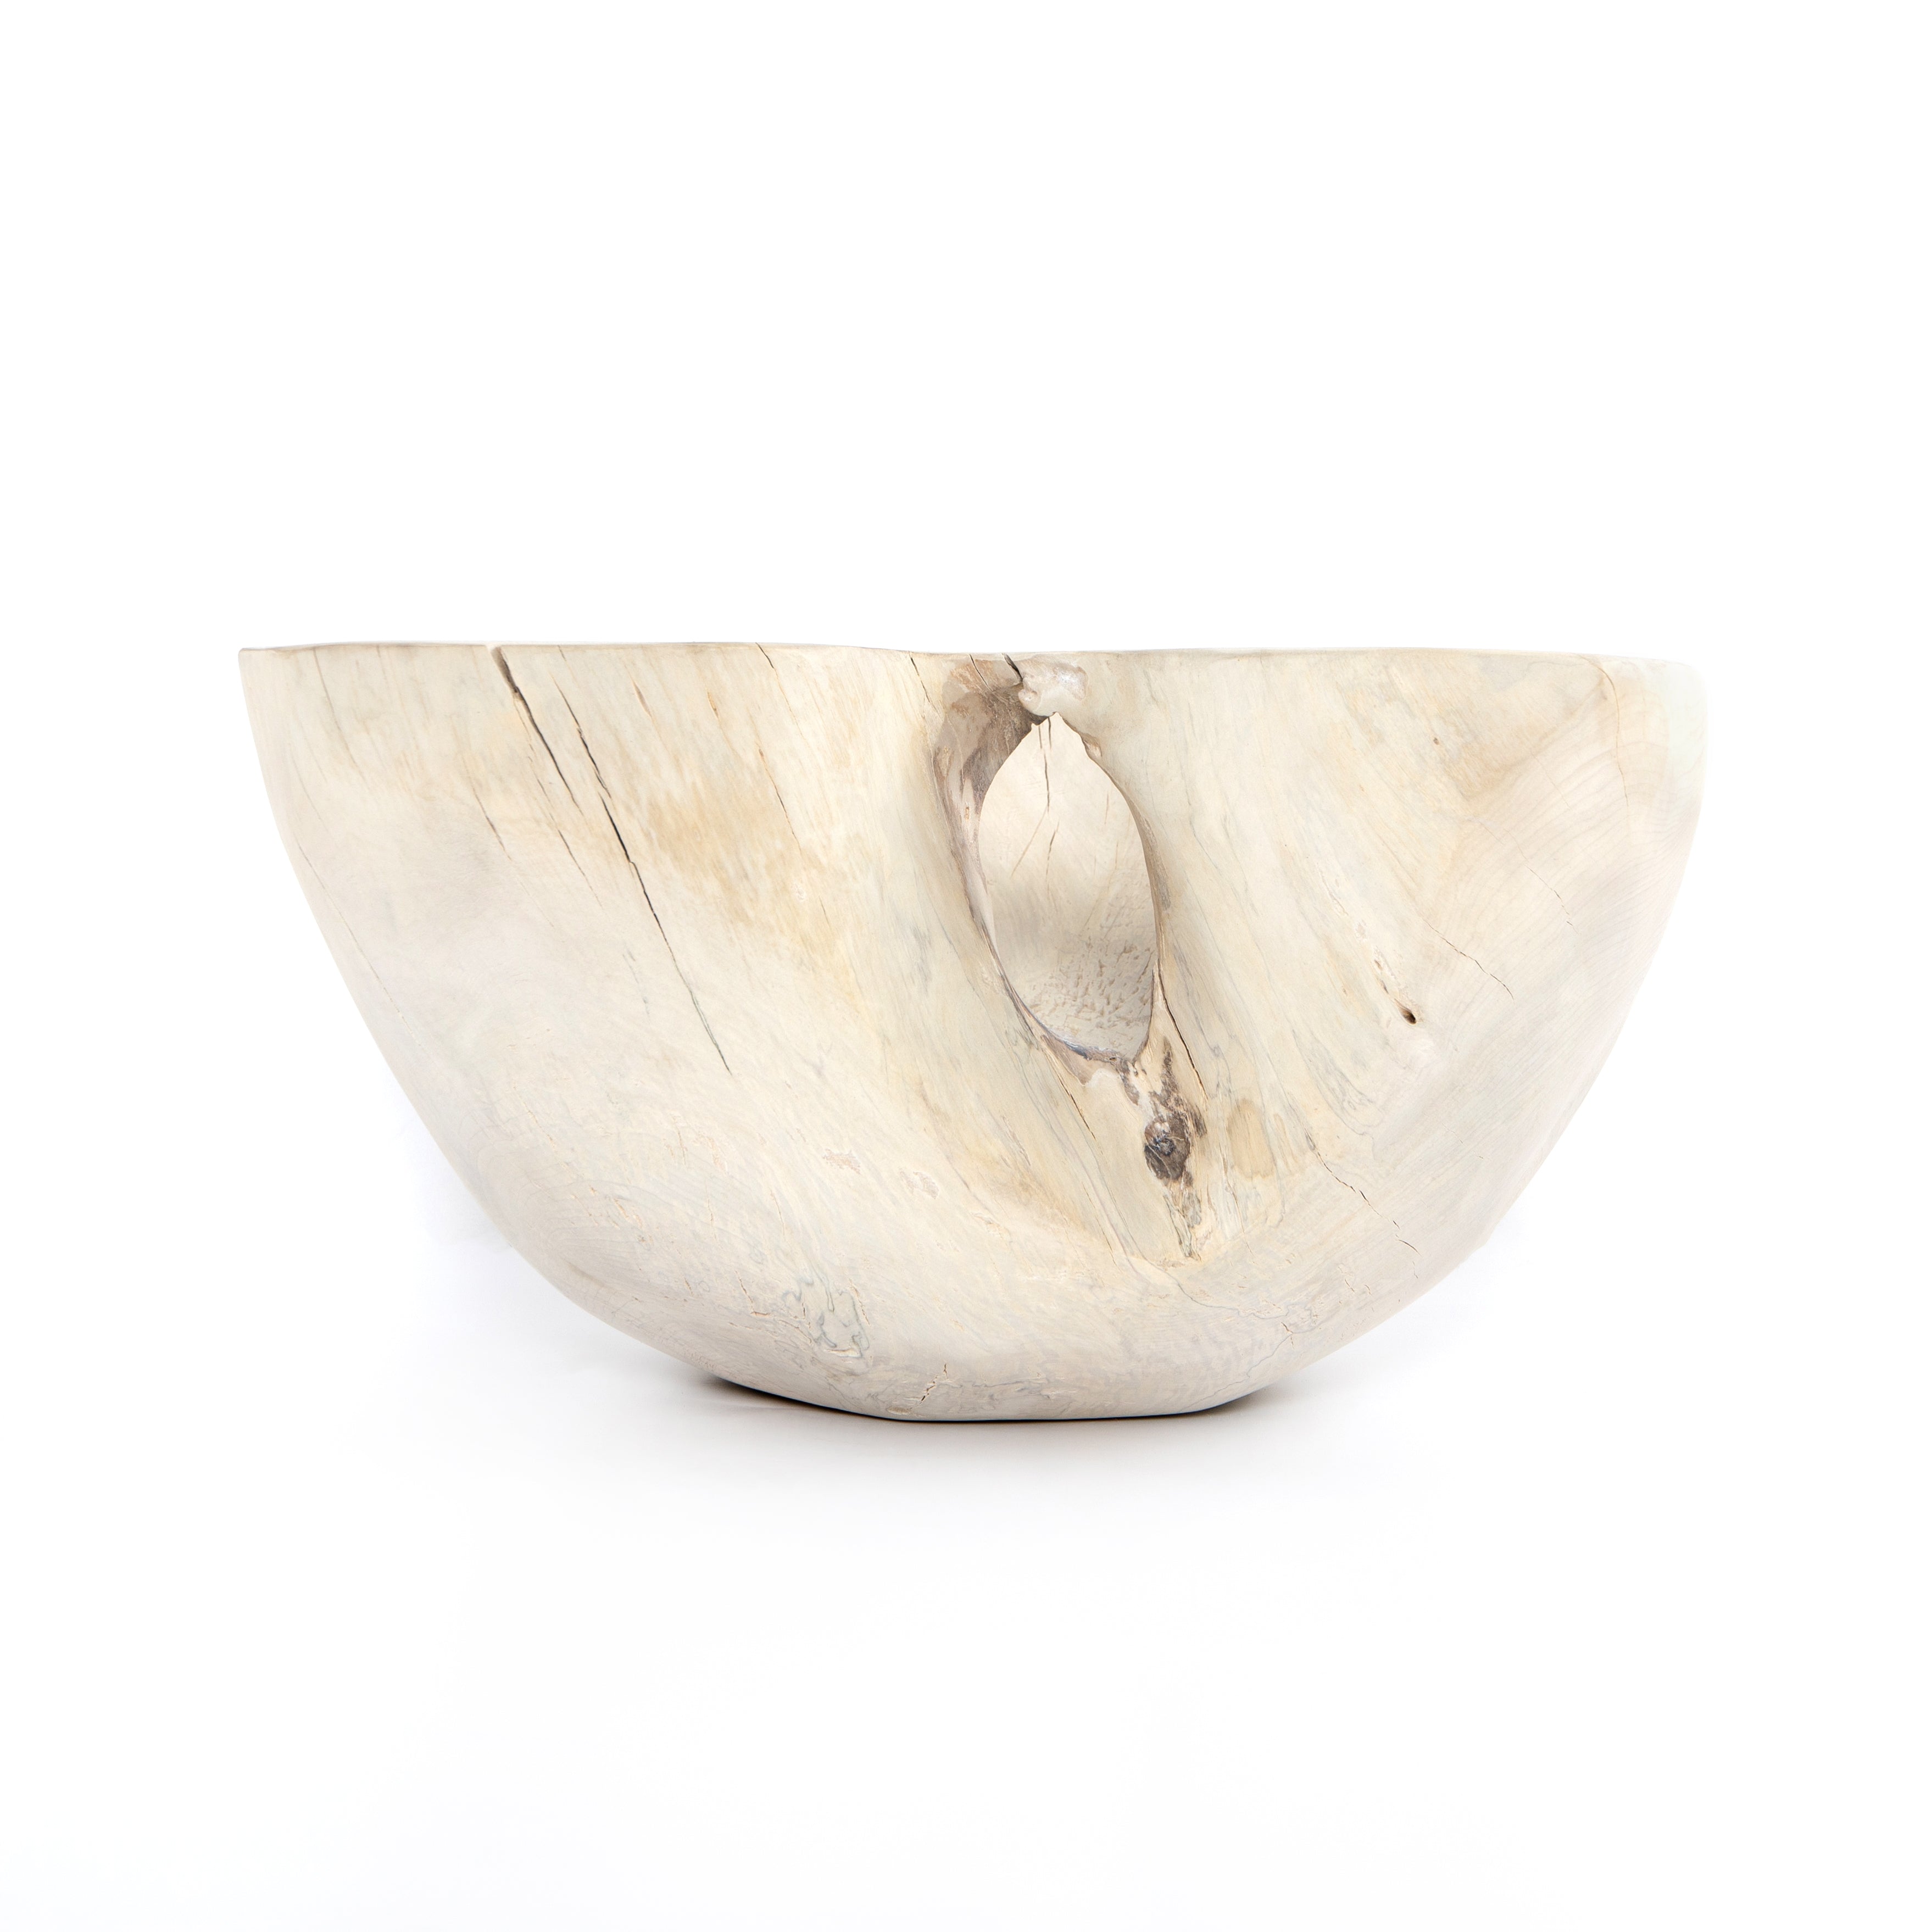 Made from solid reclaimed wood, this Live Edge Bowl - Ivory brings an earthy element to any living room, kitchen, or other area. Place atop your entryway console or showcase on your favorite shelve, this bowl is sure to catch the eye of any guest.   Amethyst Home celebrates natural materials, which often comes with beautiful imperfections. Each piece is made uniquely for you, please expect some variation and character. We embrace the design approach of Wabi Sabi!  Overall Dimensions: 16.00"w x 16.00"d x 11.